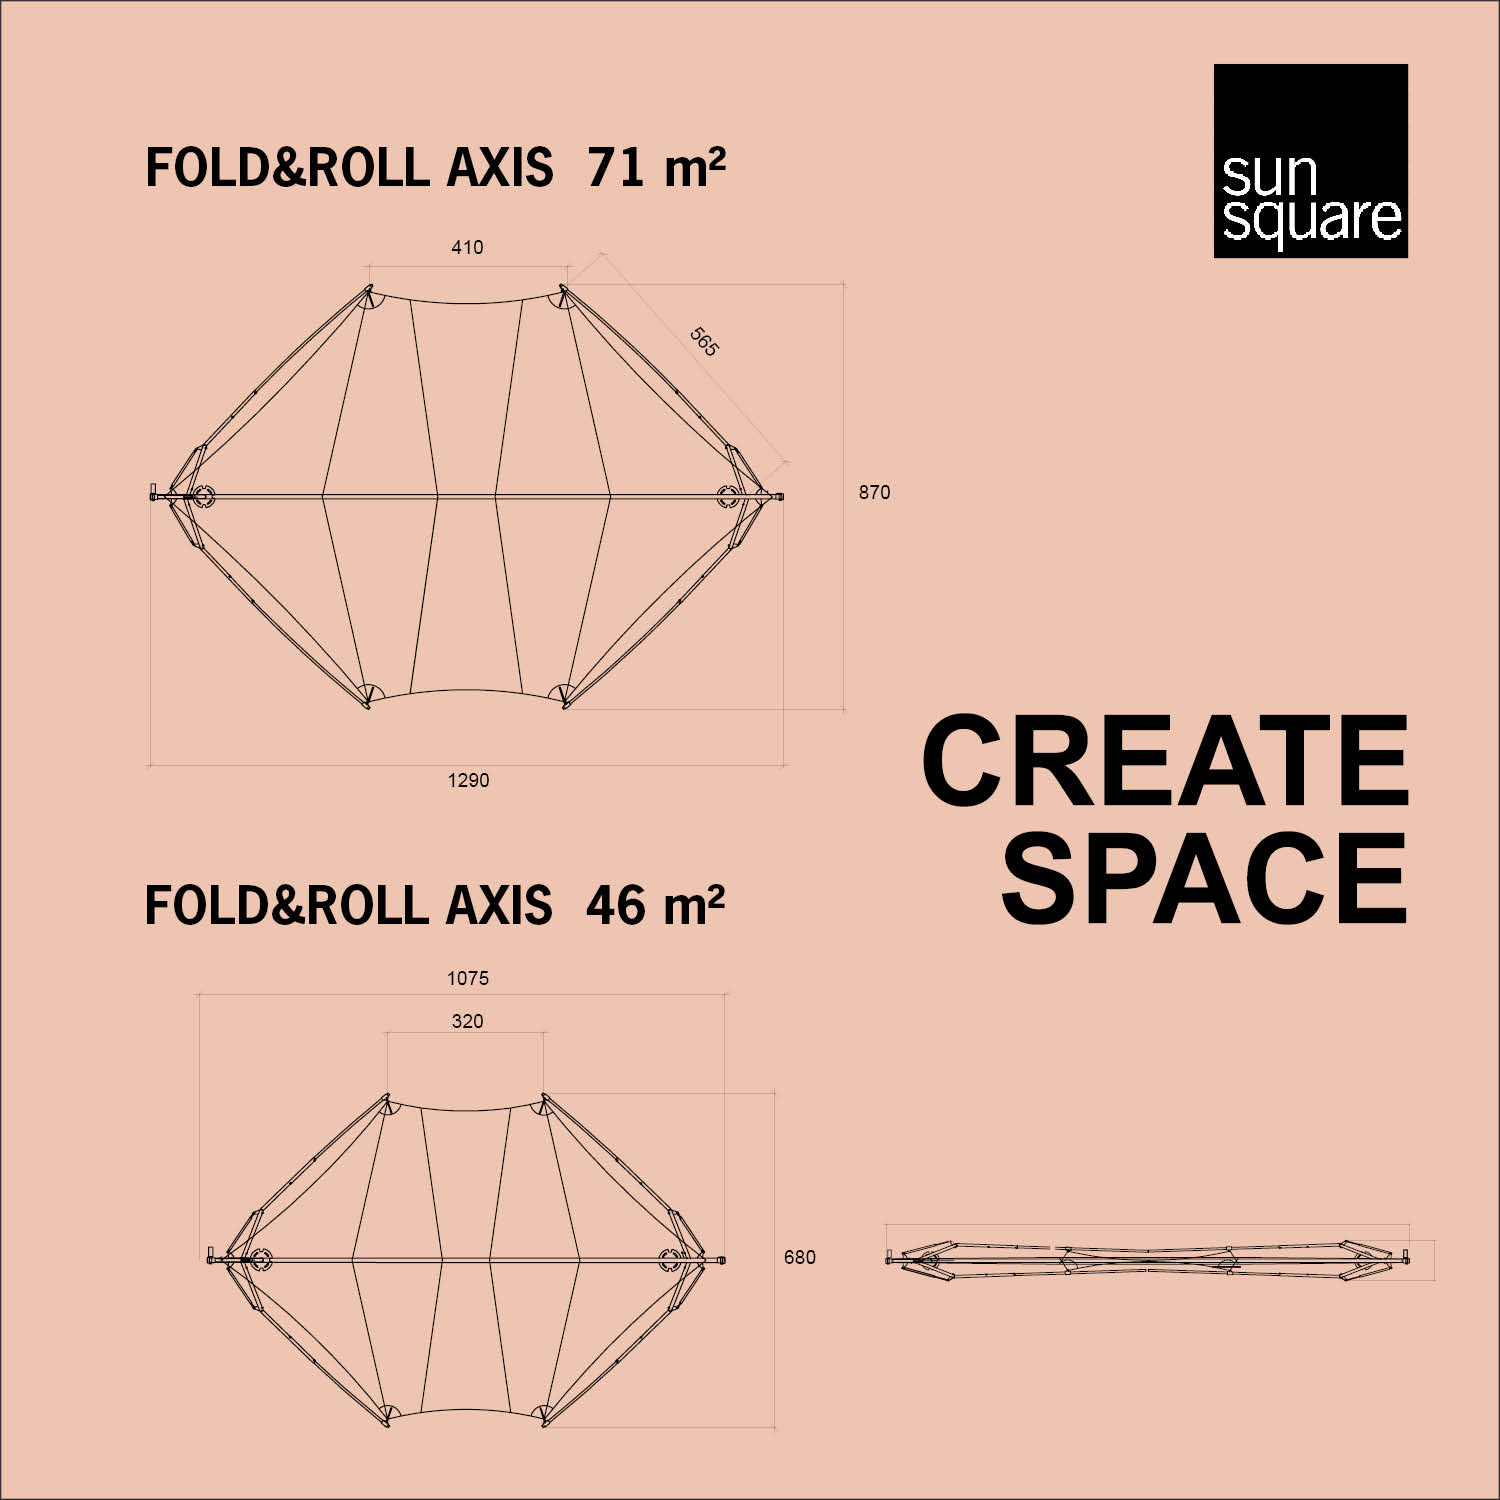 Two dimensions available: FOLD&ROLL AXIS